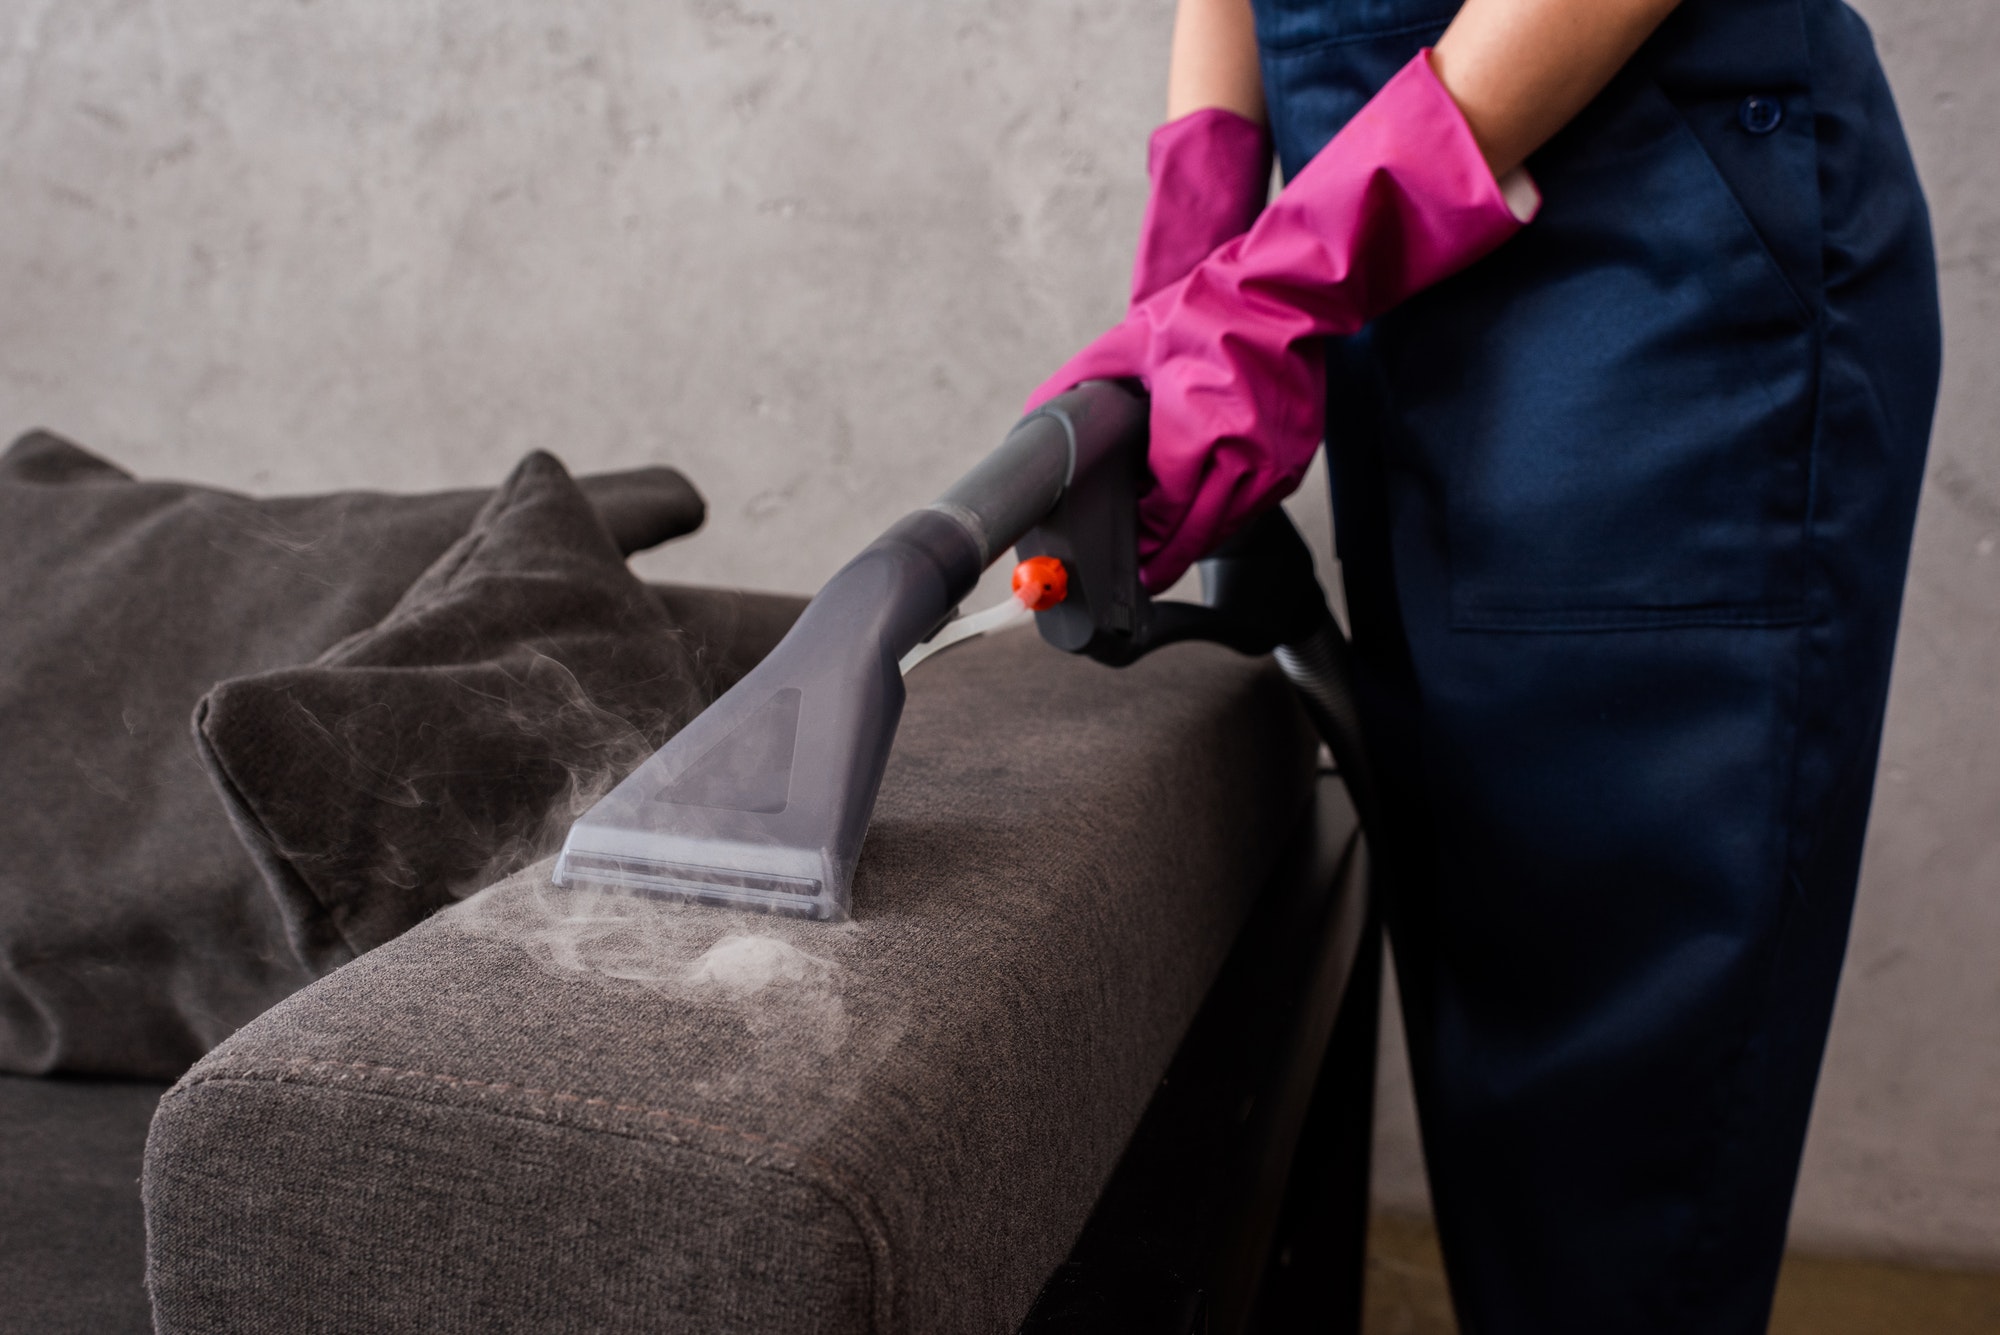 Cropped view of cleaner using vacuum cleaner with hot steam on couch upholstery